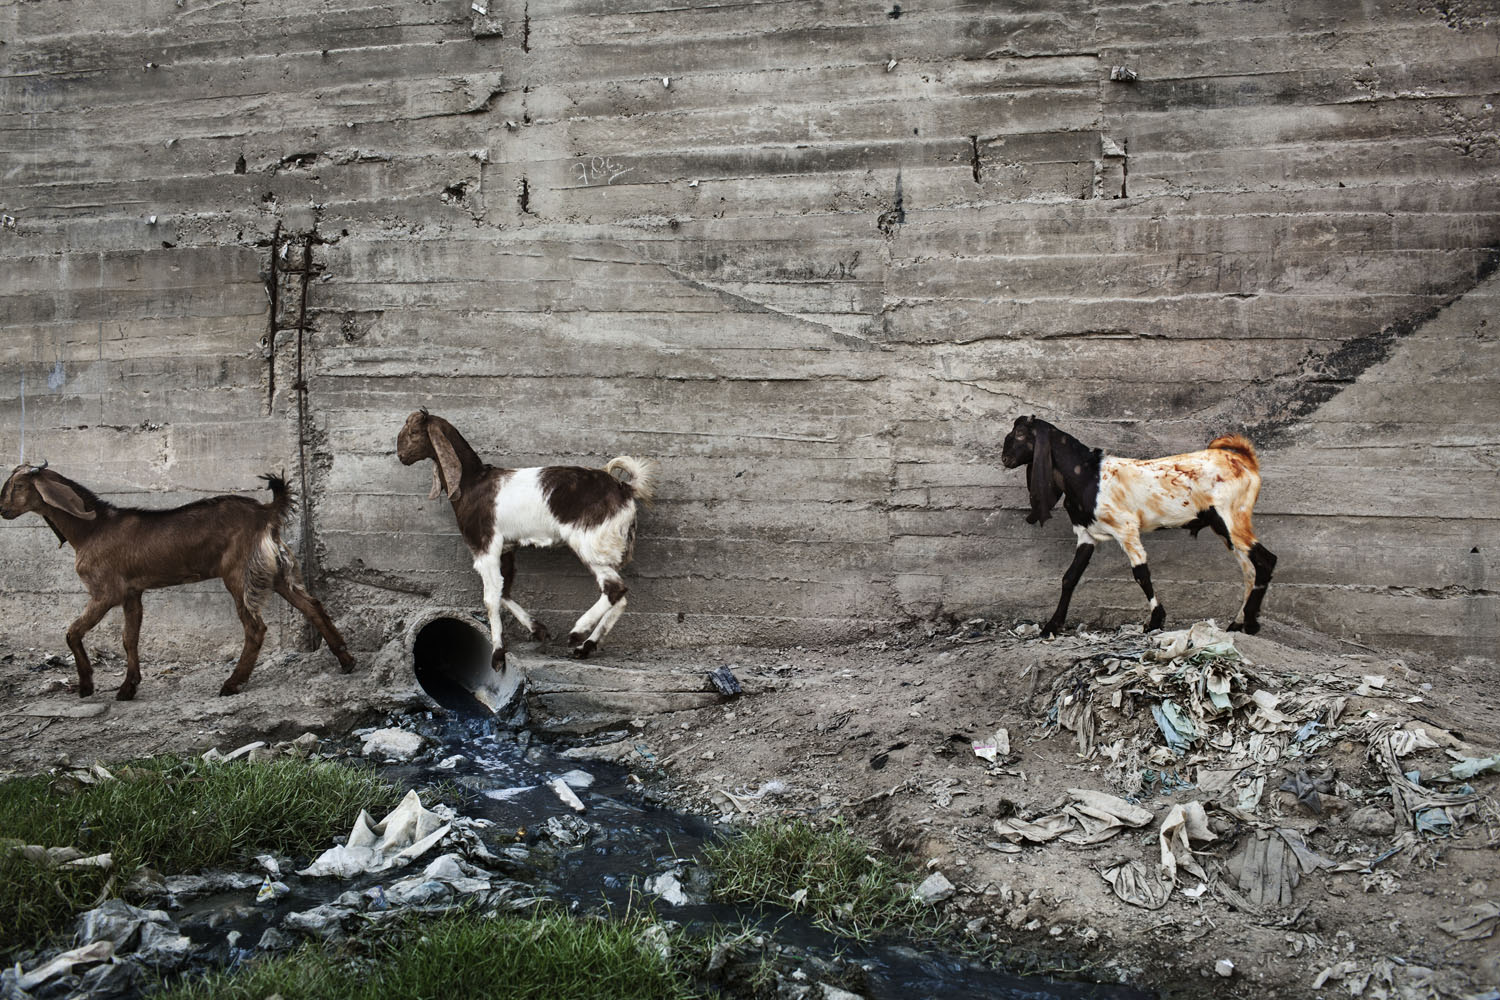 Image: Goats passing away a waste pipe at Union Council 4 in Karachi.